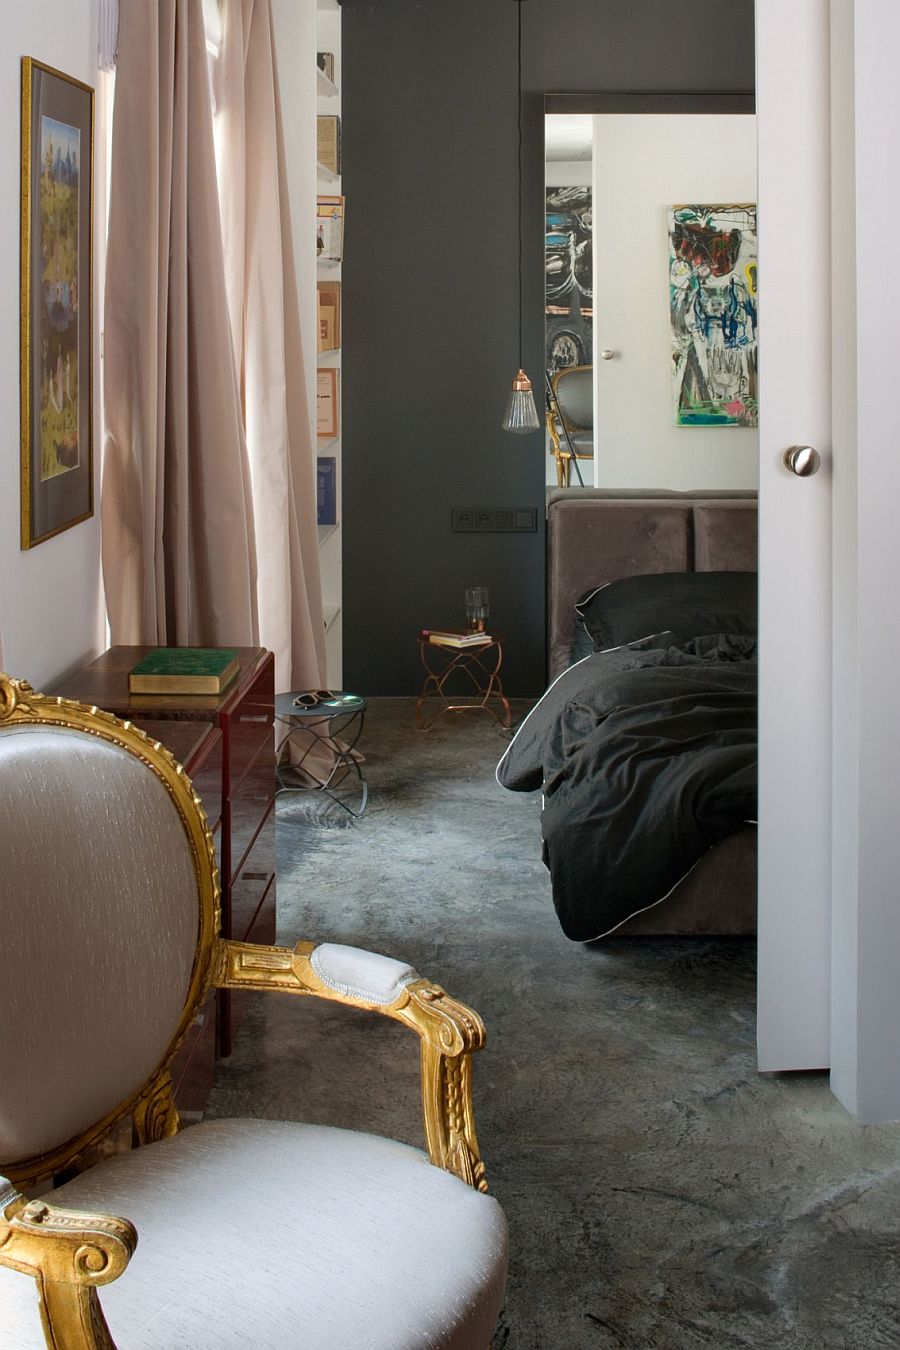 Bedroom of the tiny apartment with eclectic style